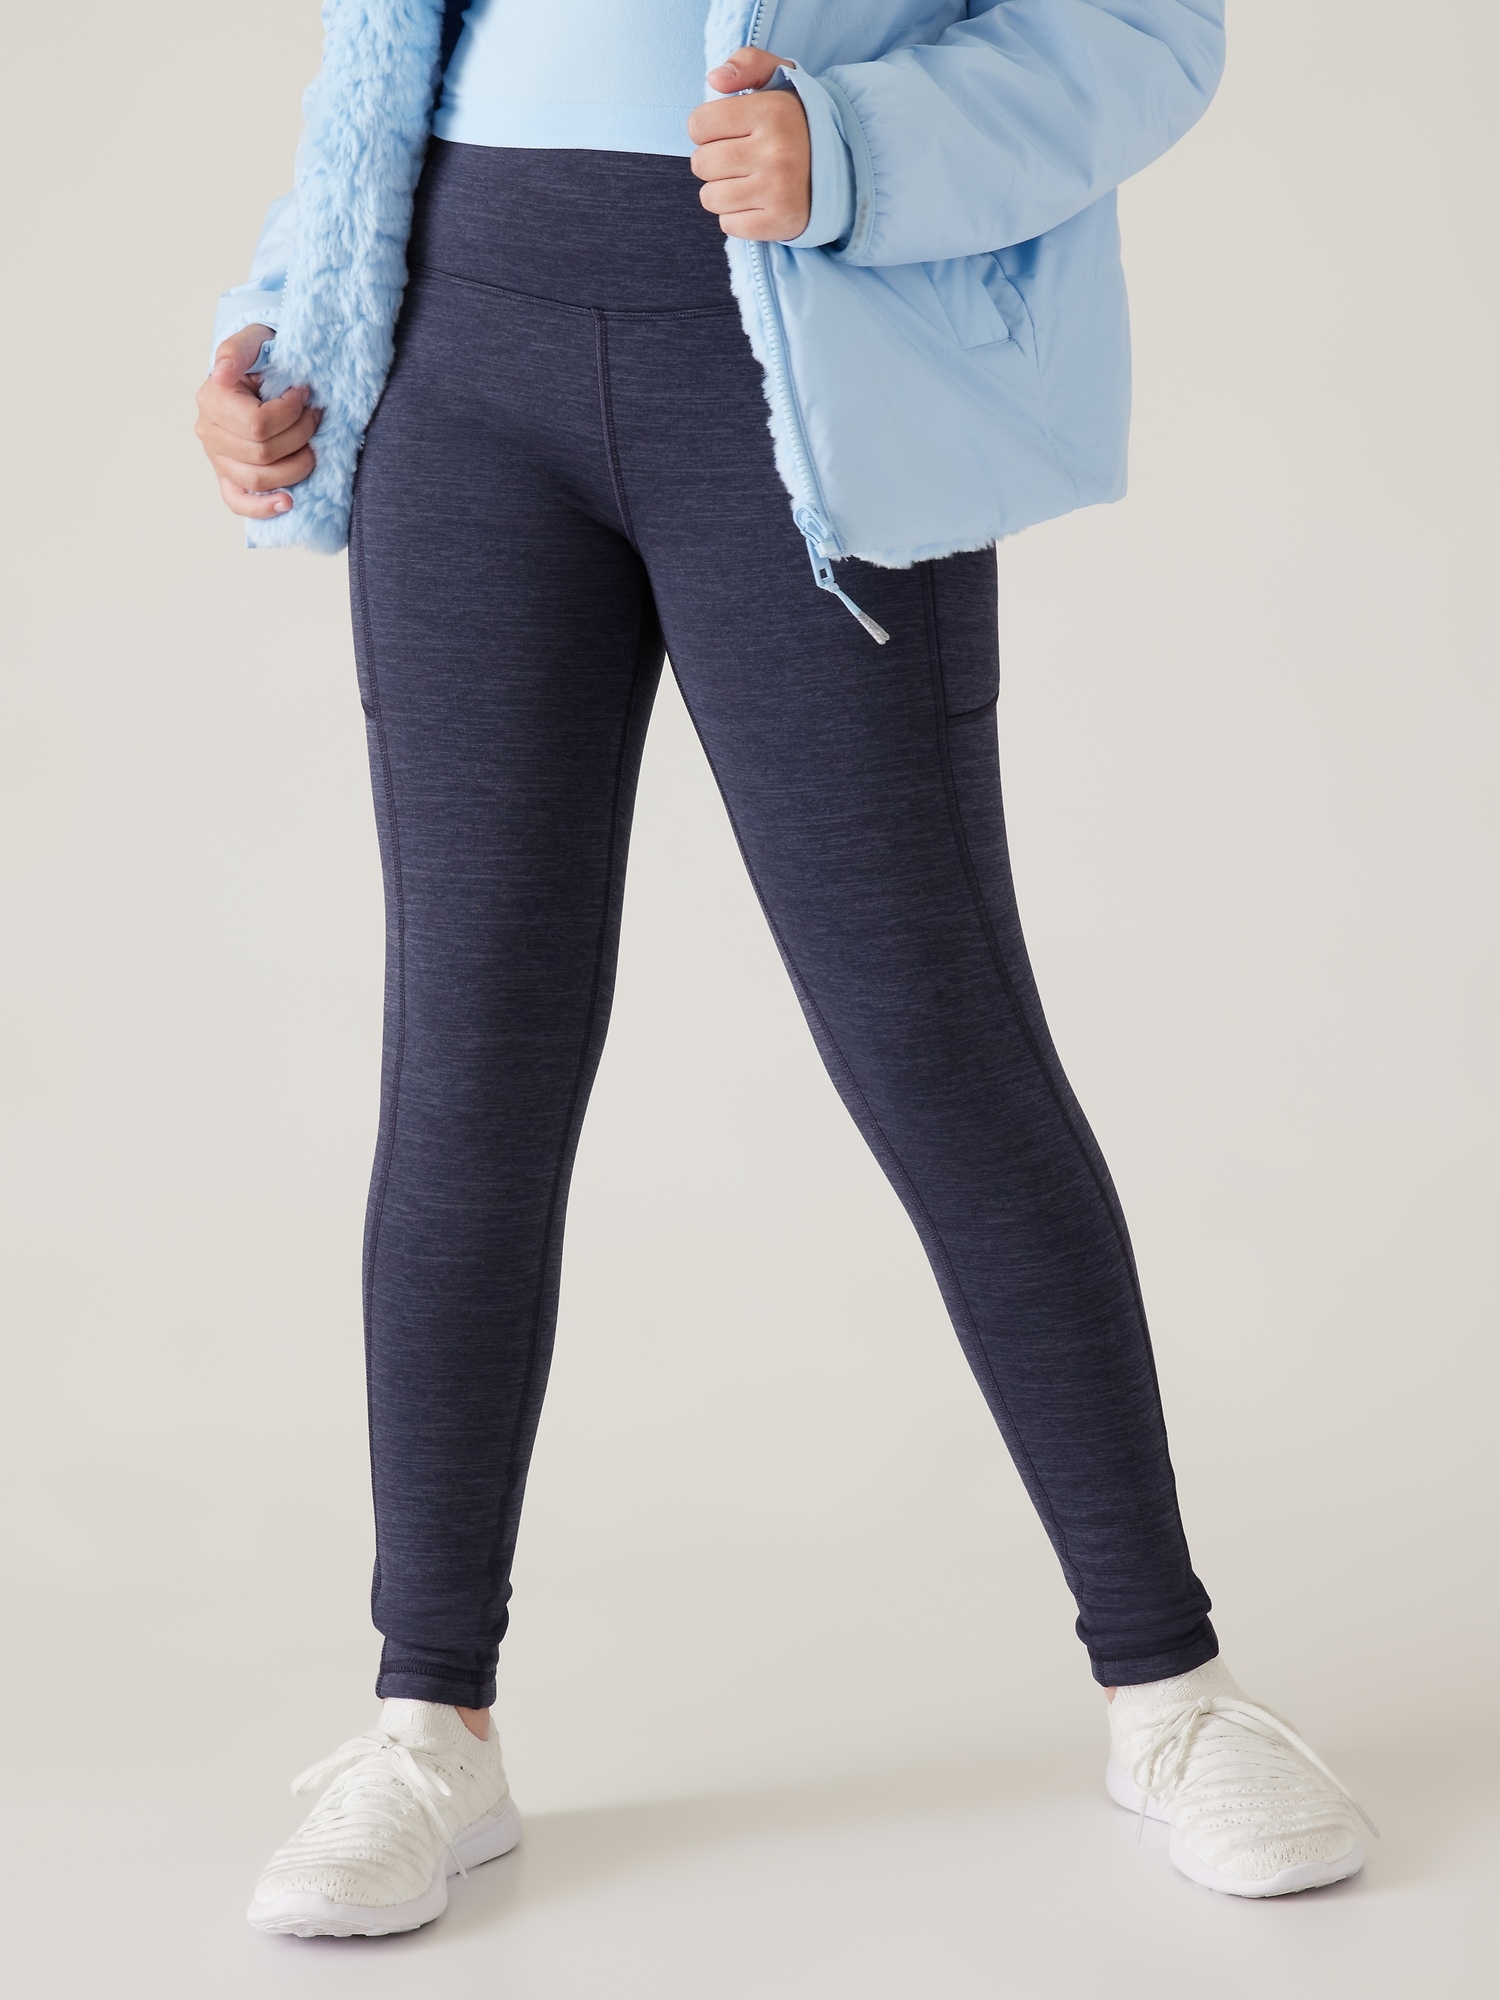 High Rise Leggings with Pockets